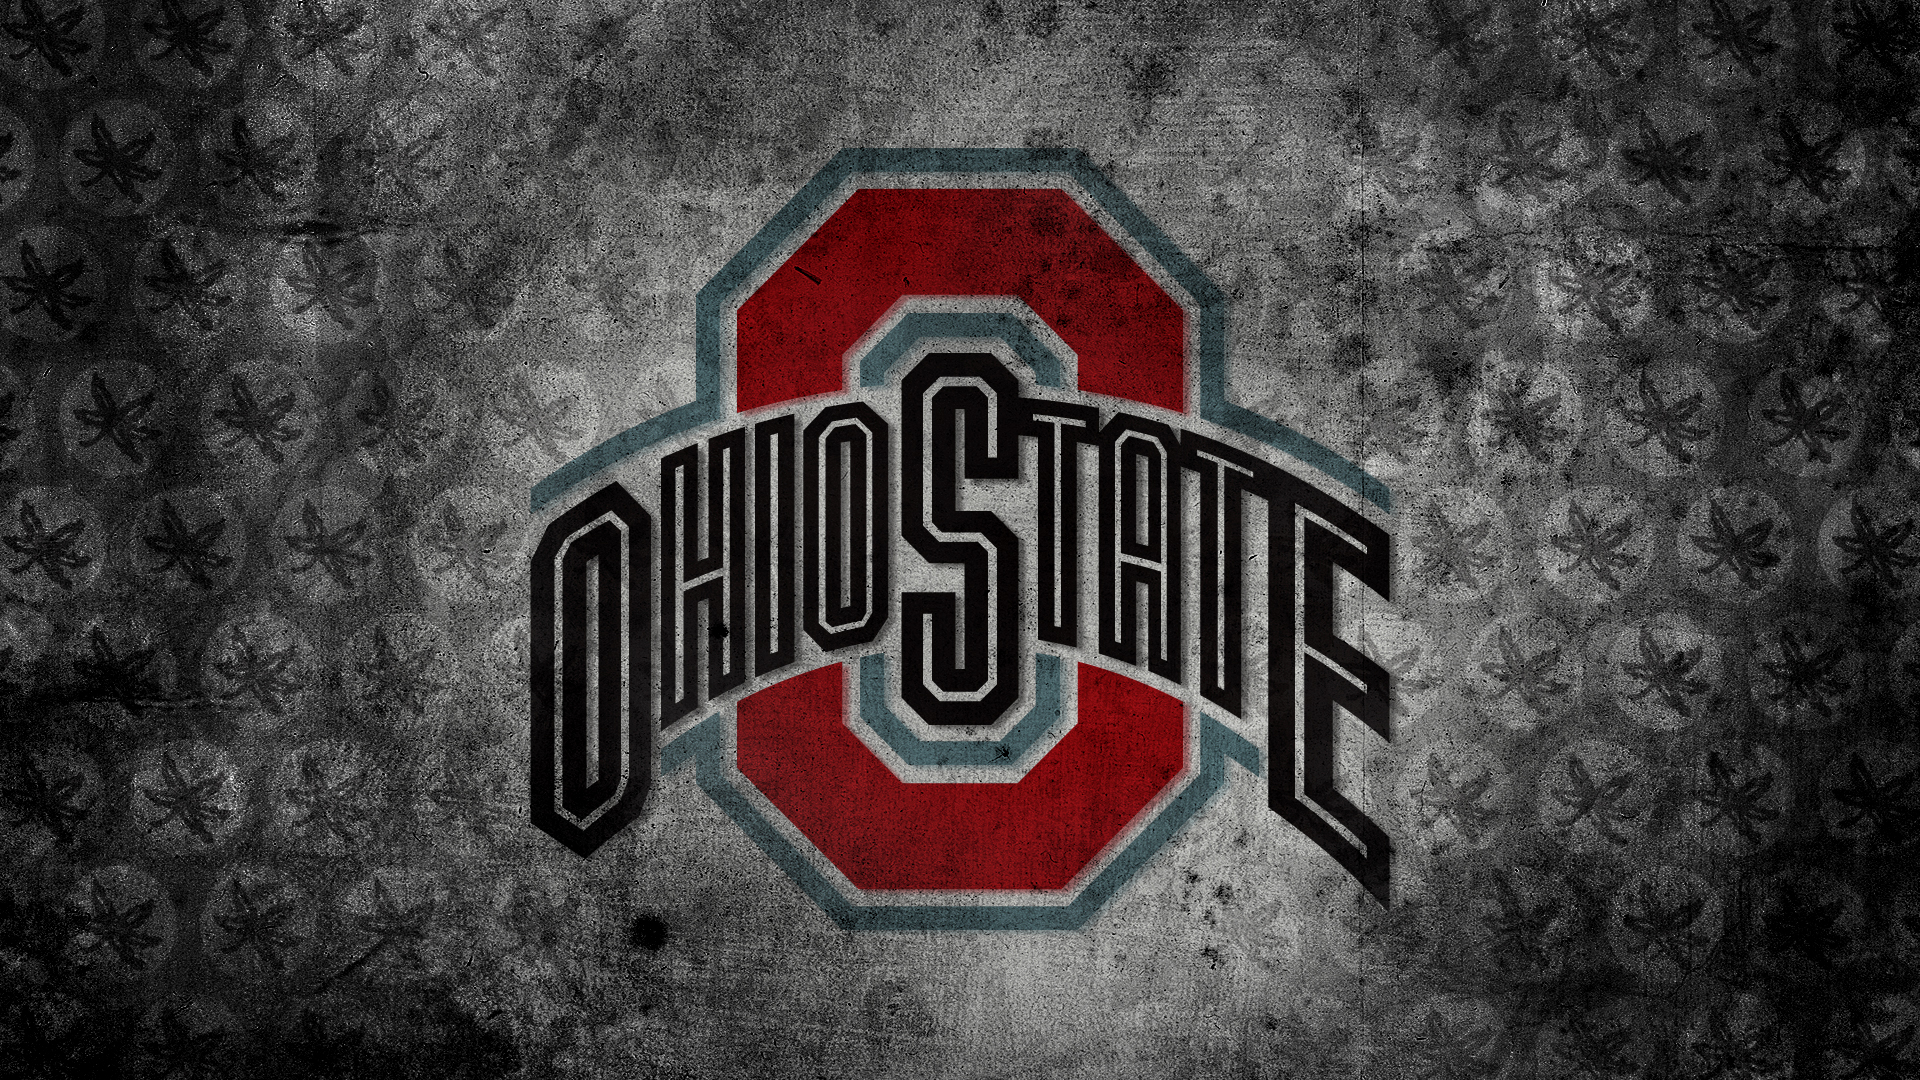 Ohio State Buckeyes Football Backgrounds High Quality | Wallpapers ...